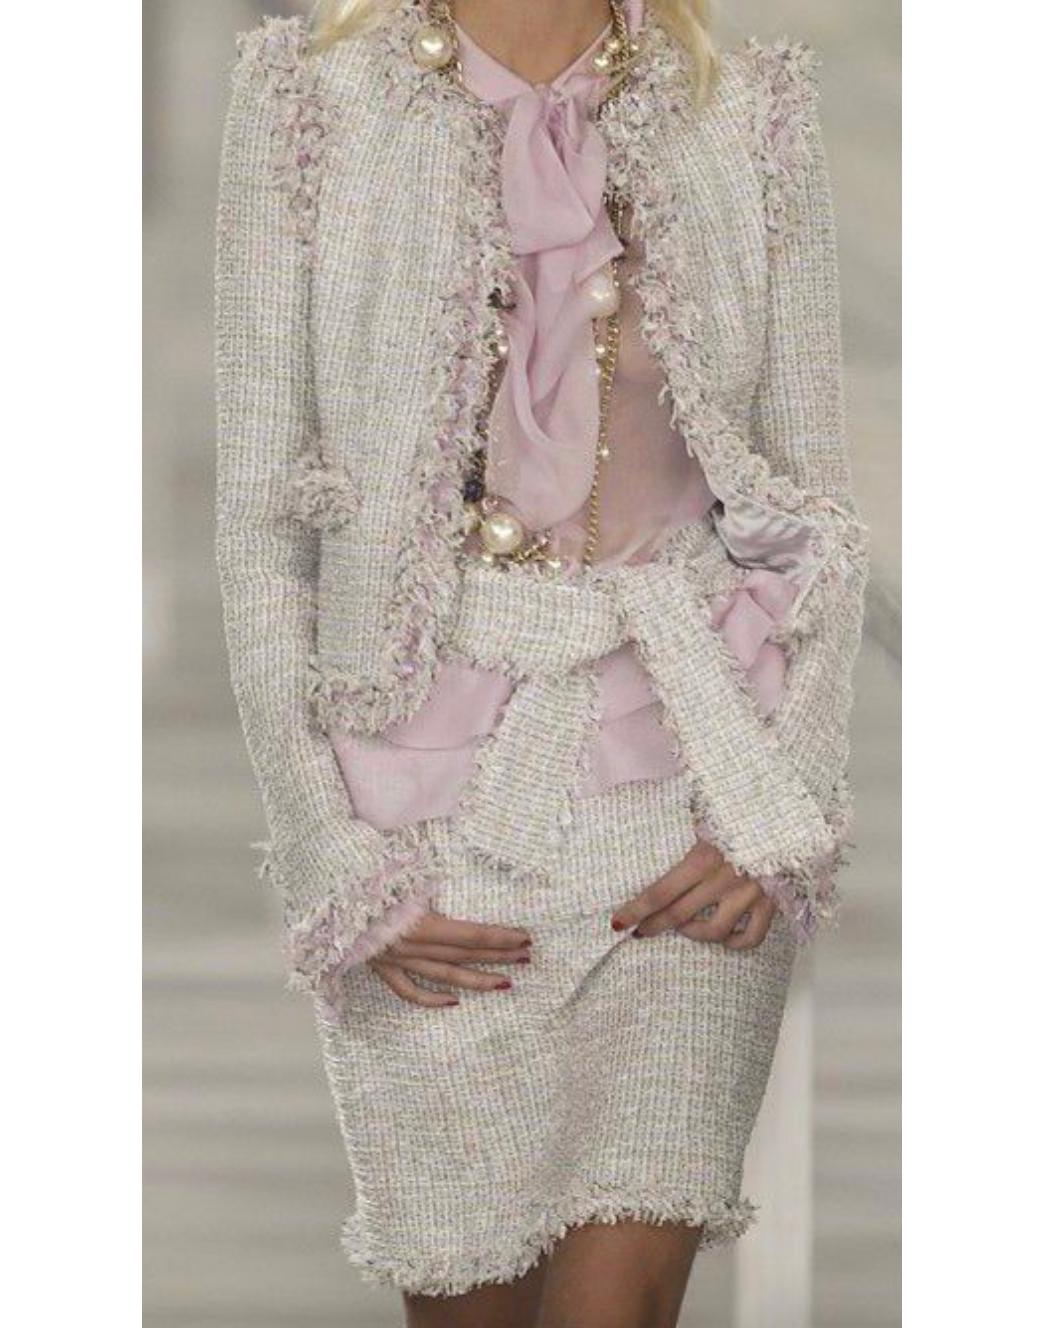 Spring 2004 Chanel Pale Pink Tweed Skirt Suit with Fringe Trim  6